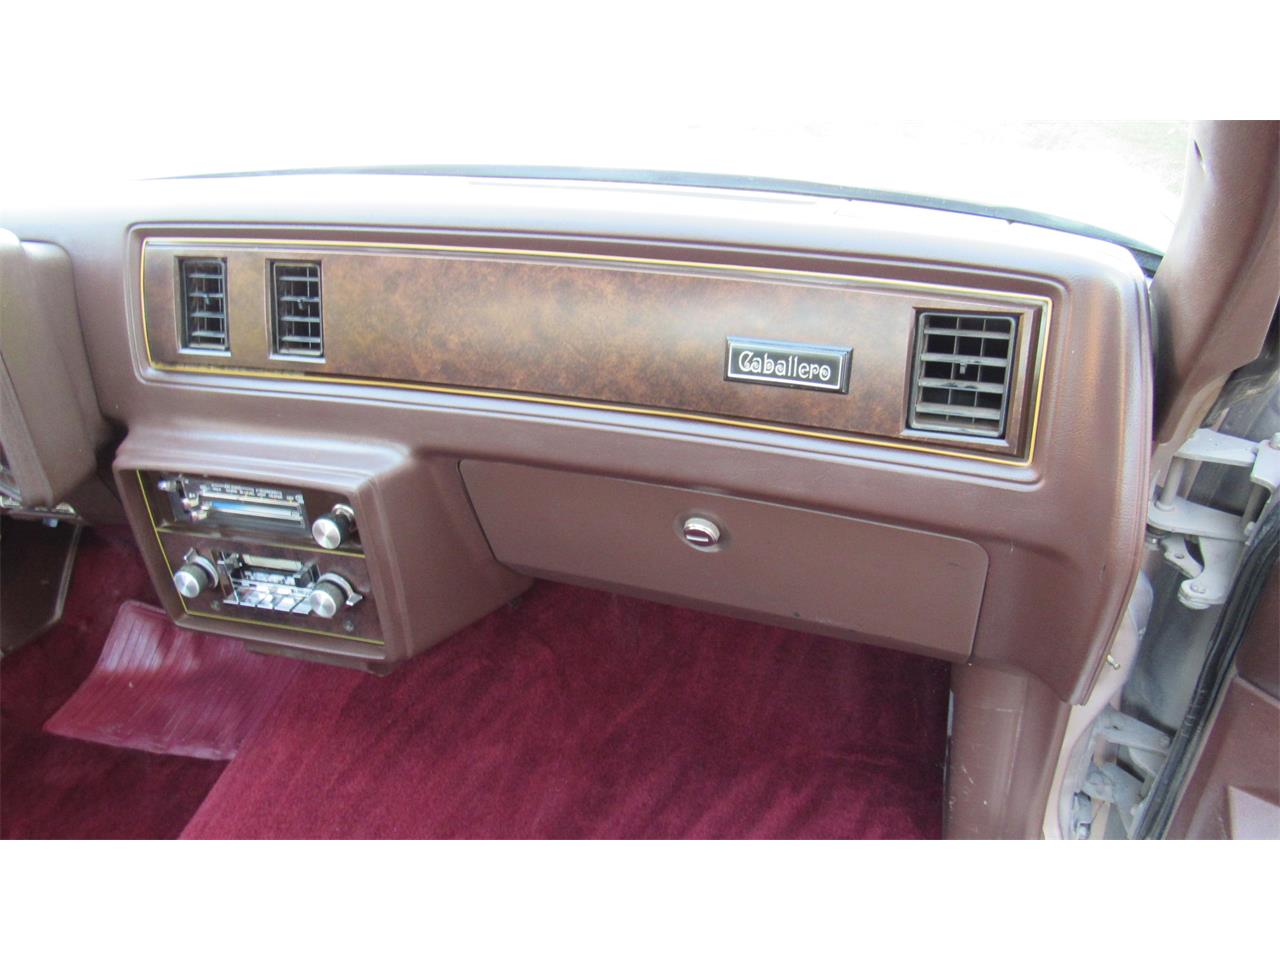 1983 GMC Caballero for sale in Milford, OH – photo 65